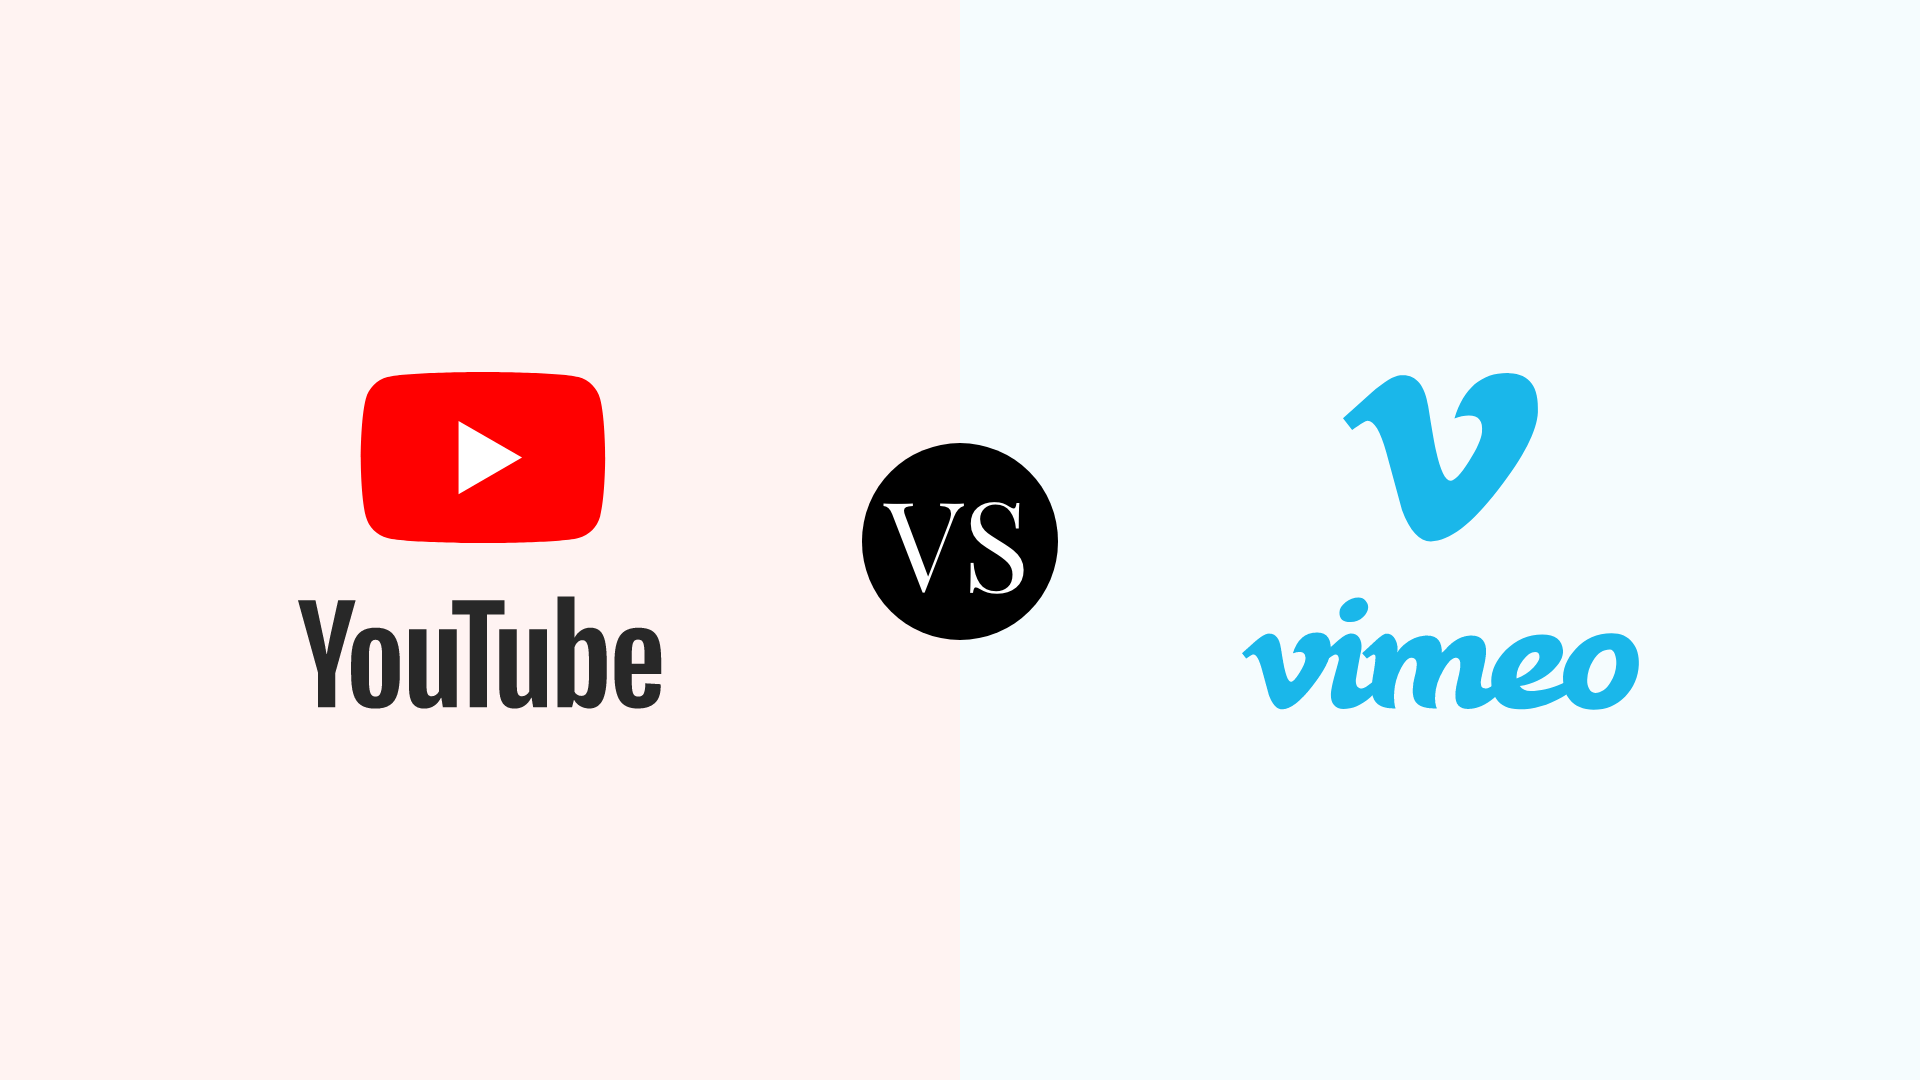 YouTube vs Vimeo - Which One is Better for WordPress Videos?